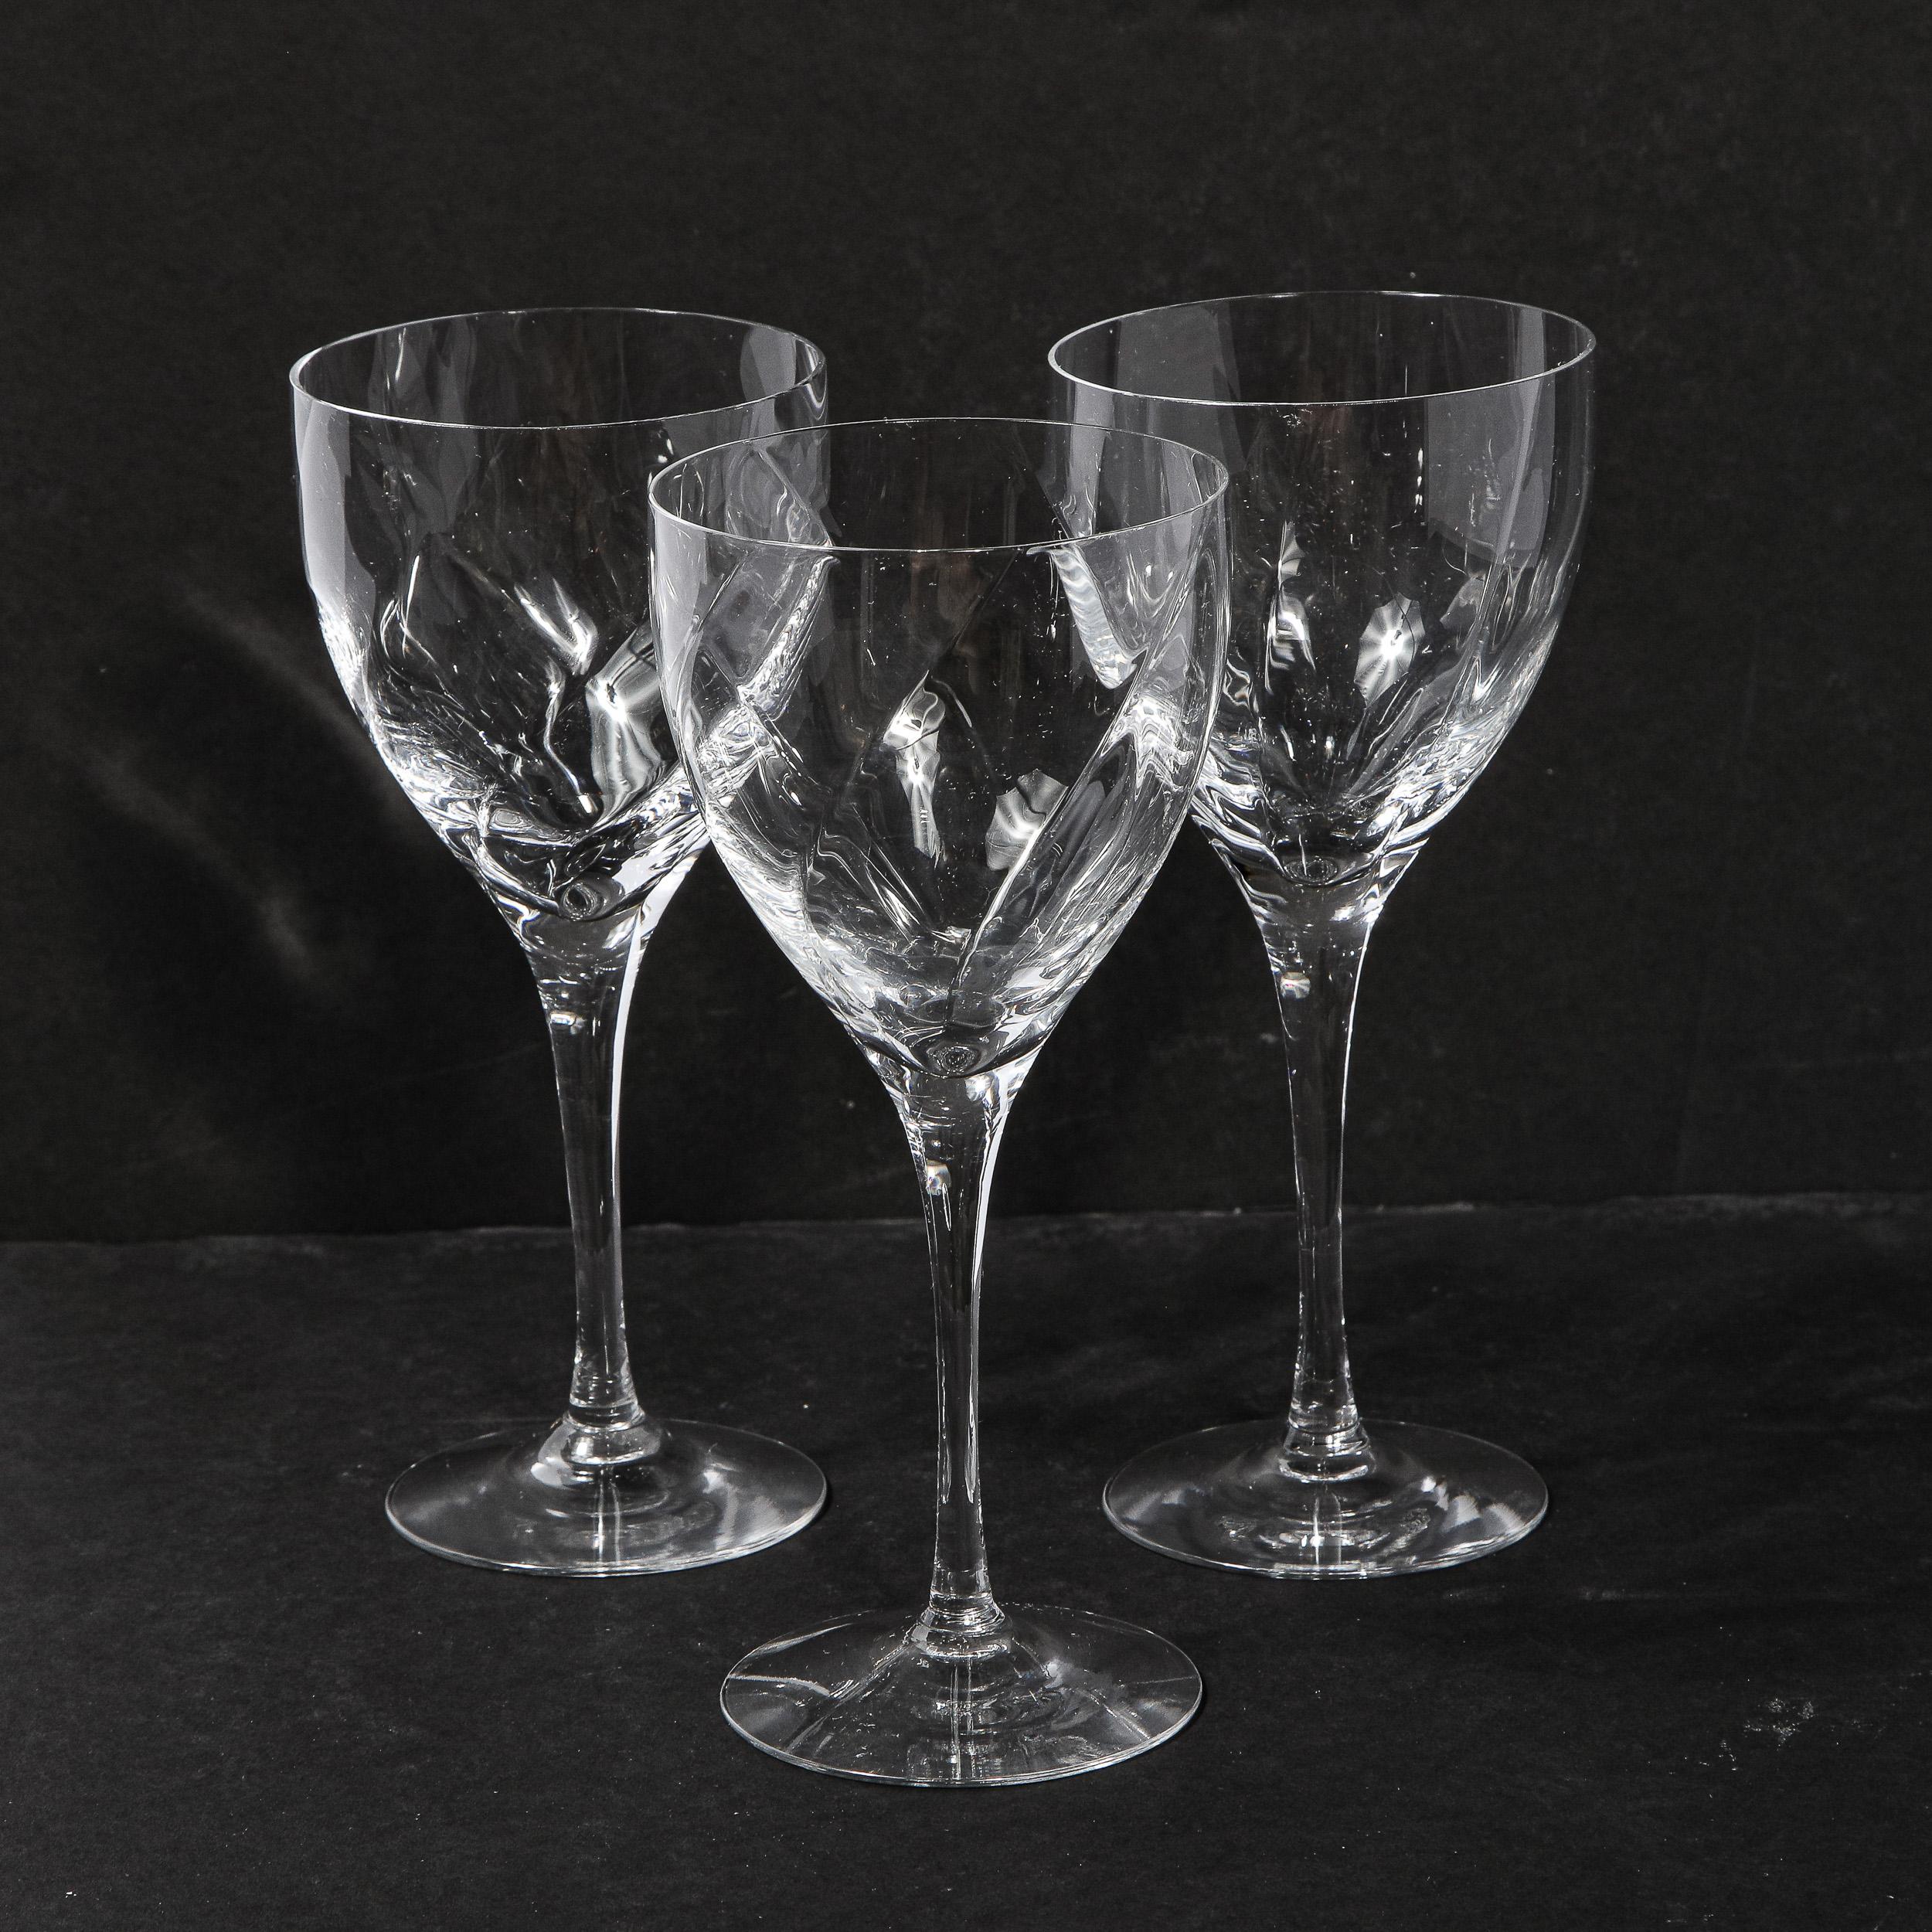 Set of Twelve Textured Translucent Crystal Wine Glasses by Tiffany & Co. 1